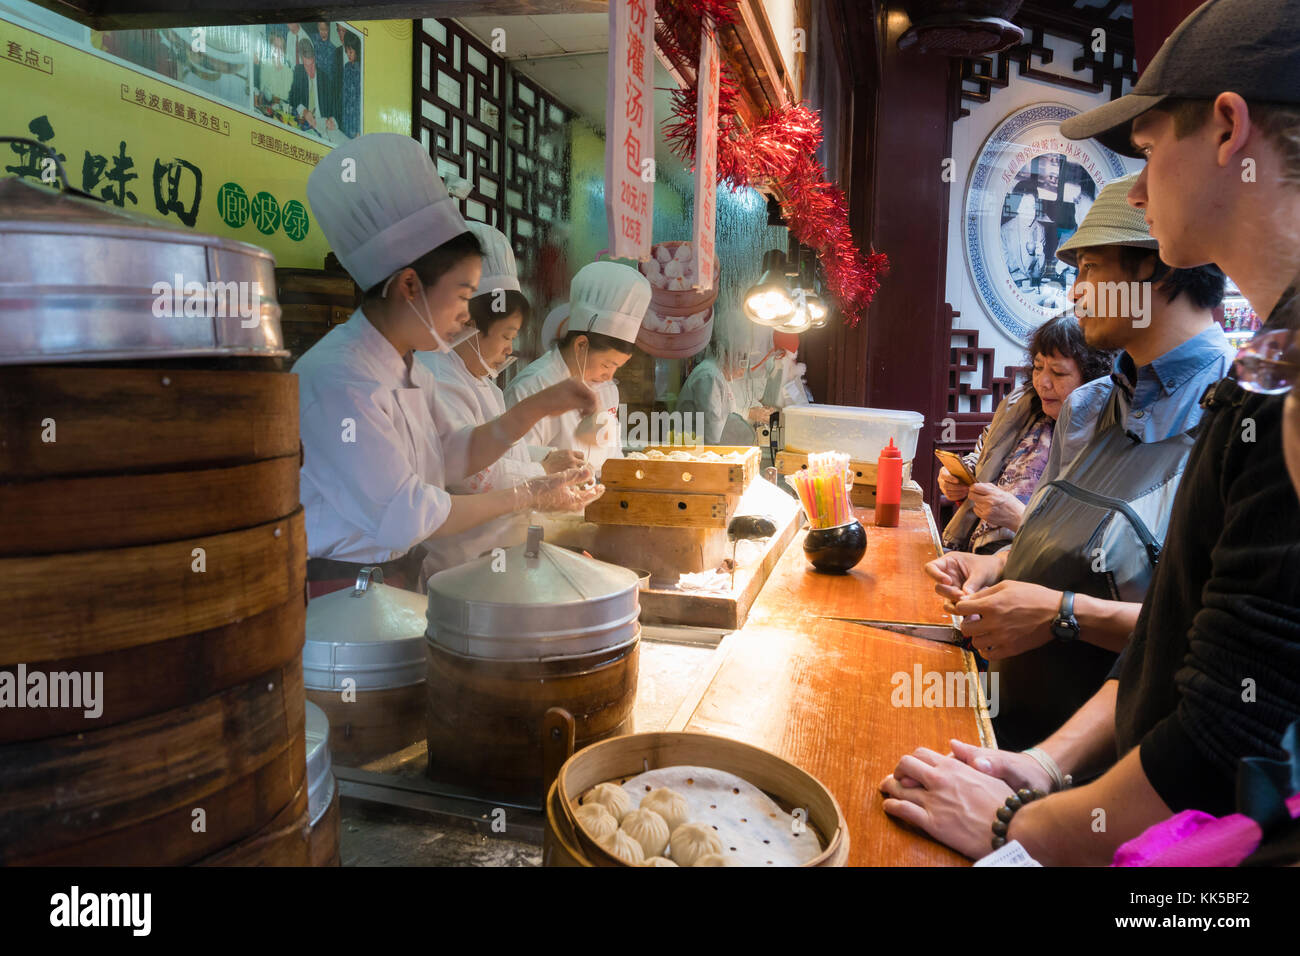 People buying Shanghai dumpling at a food stall Stock Photo